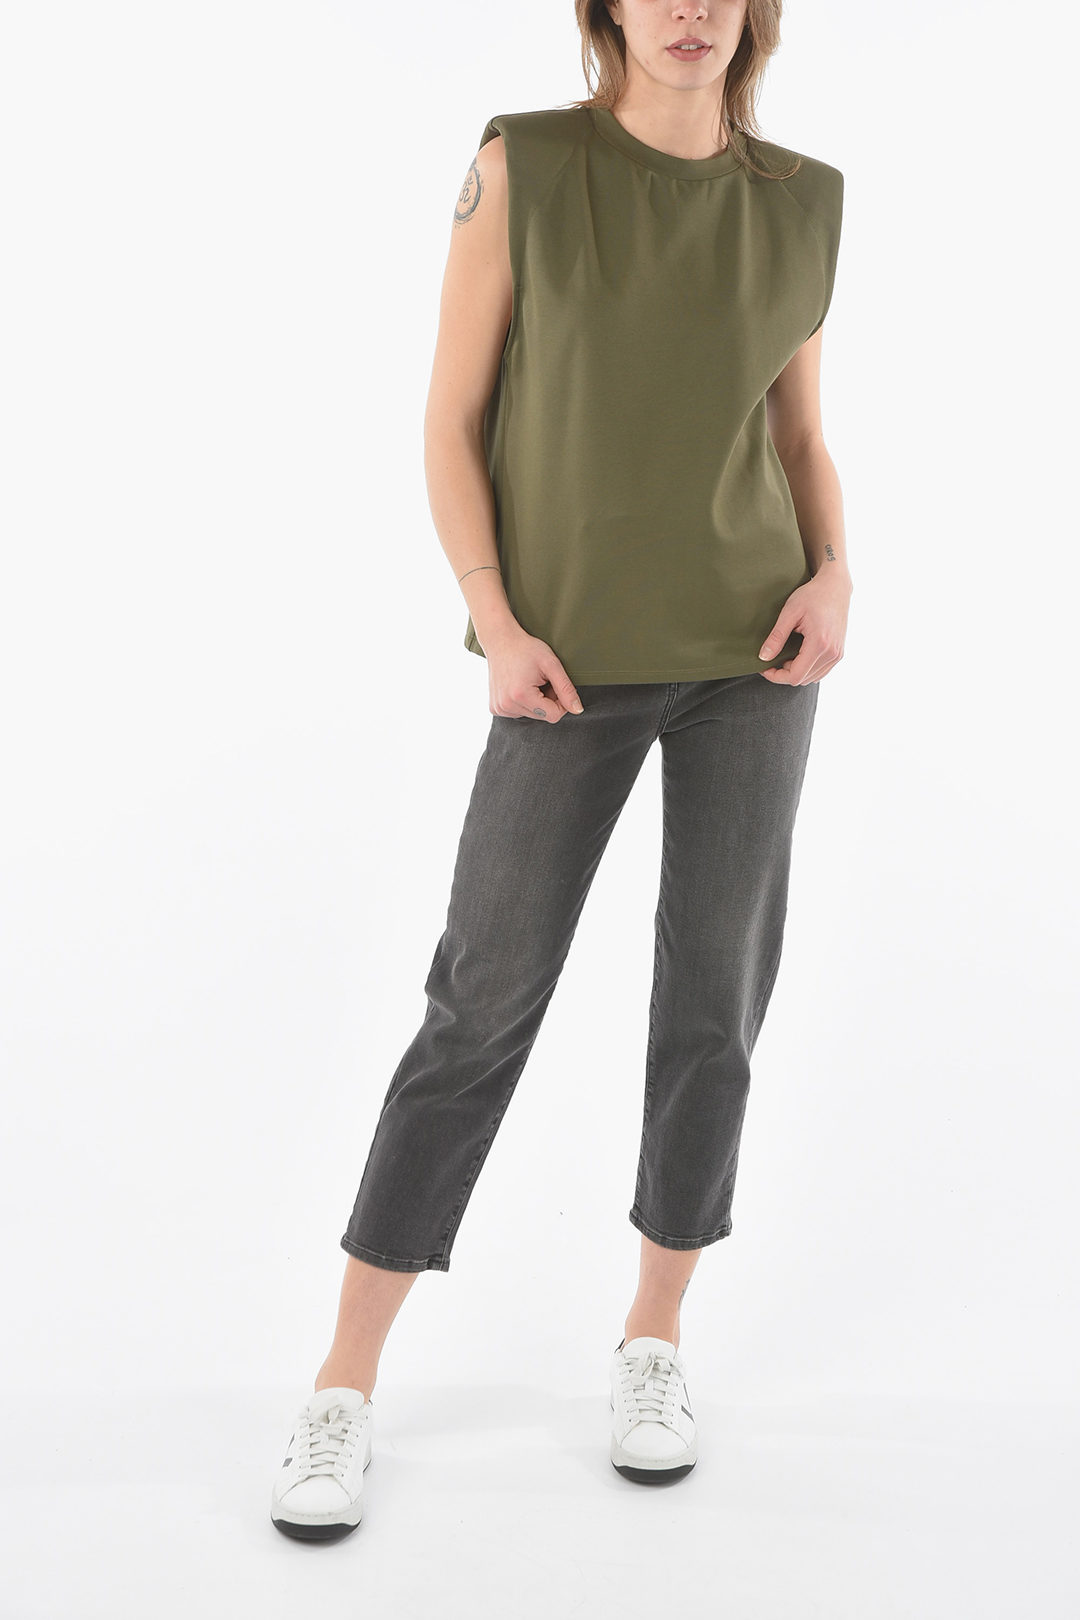 Ixos Top Relaxed Fit TAMARINDO con Spalline Imbottite donna - Glamood Outlet